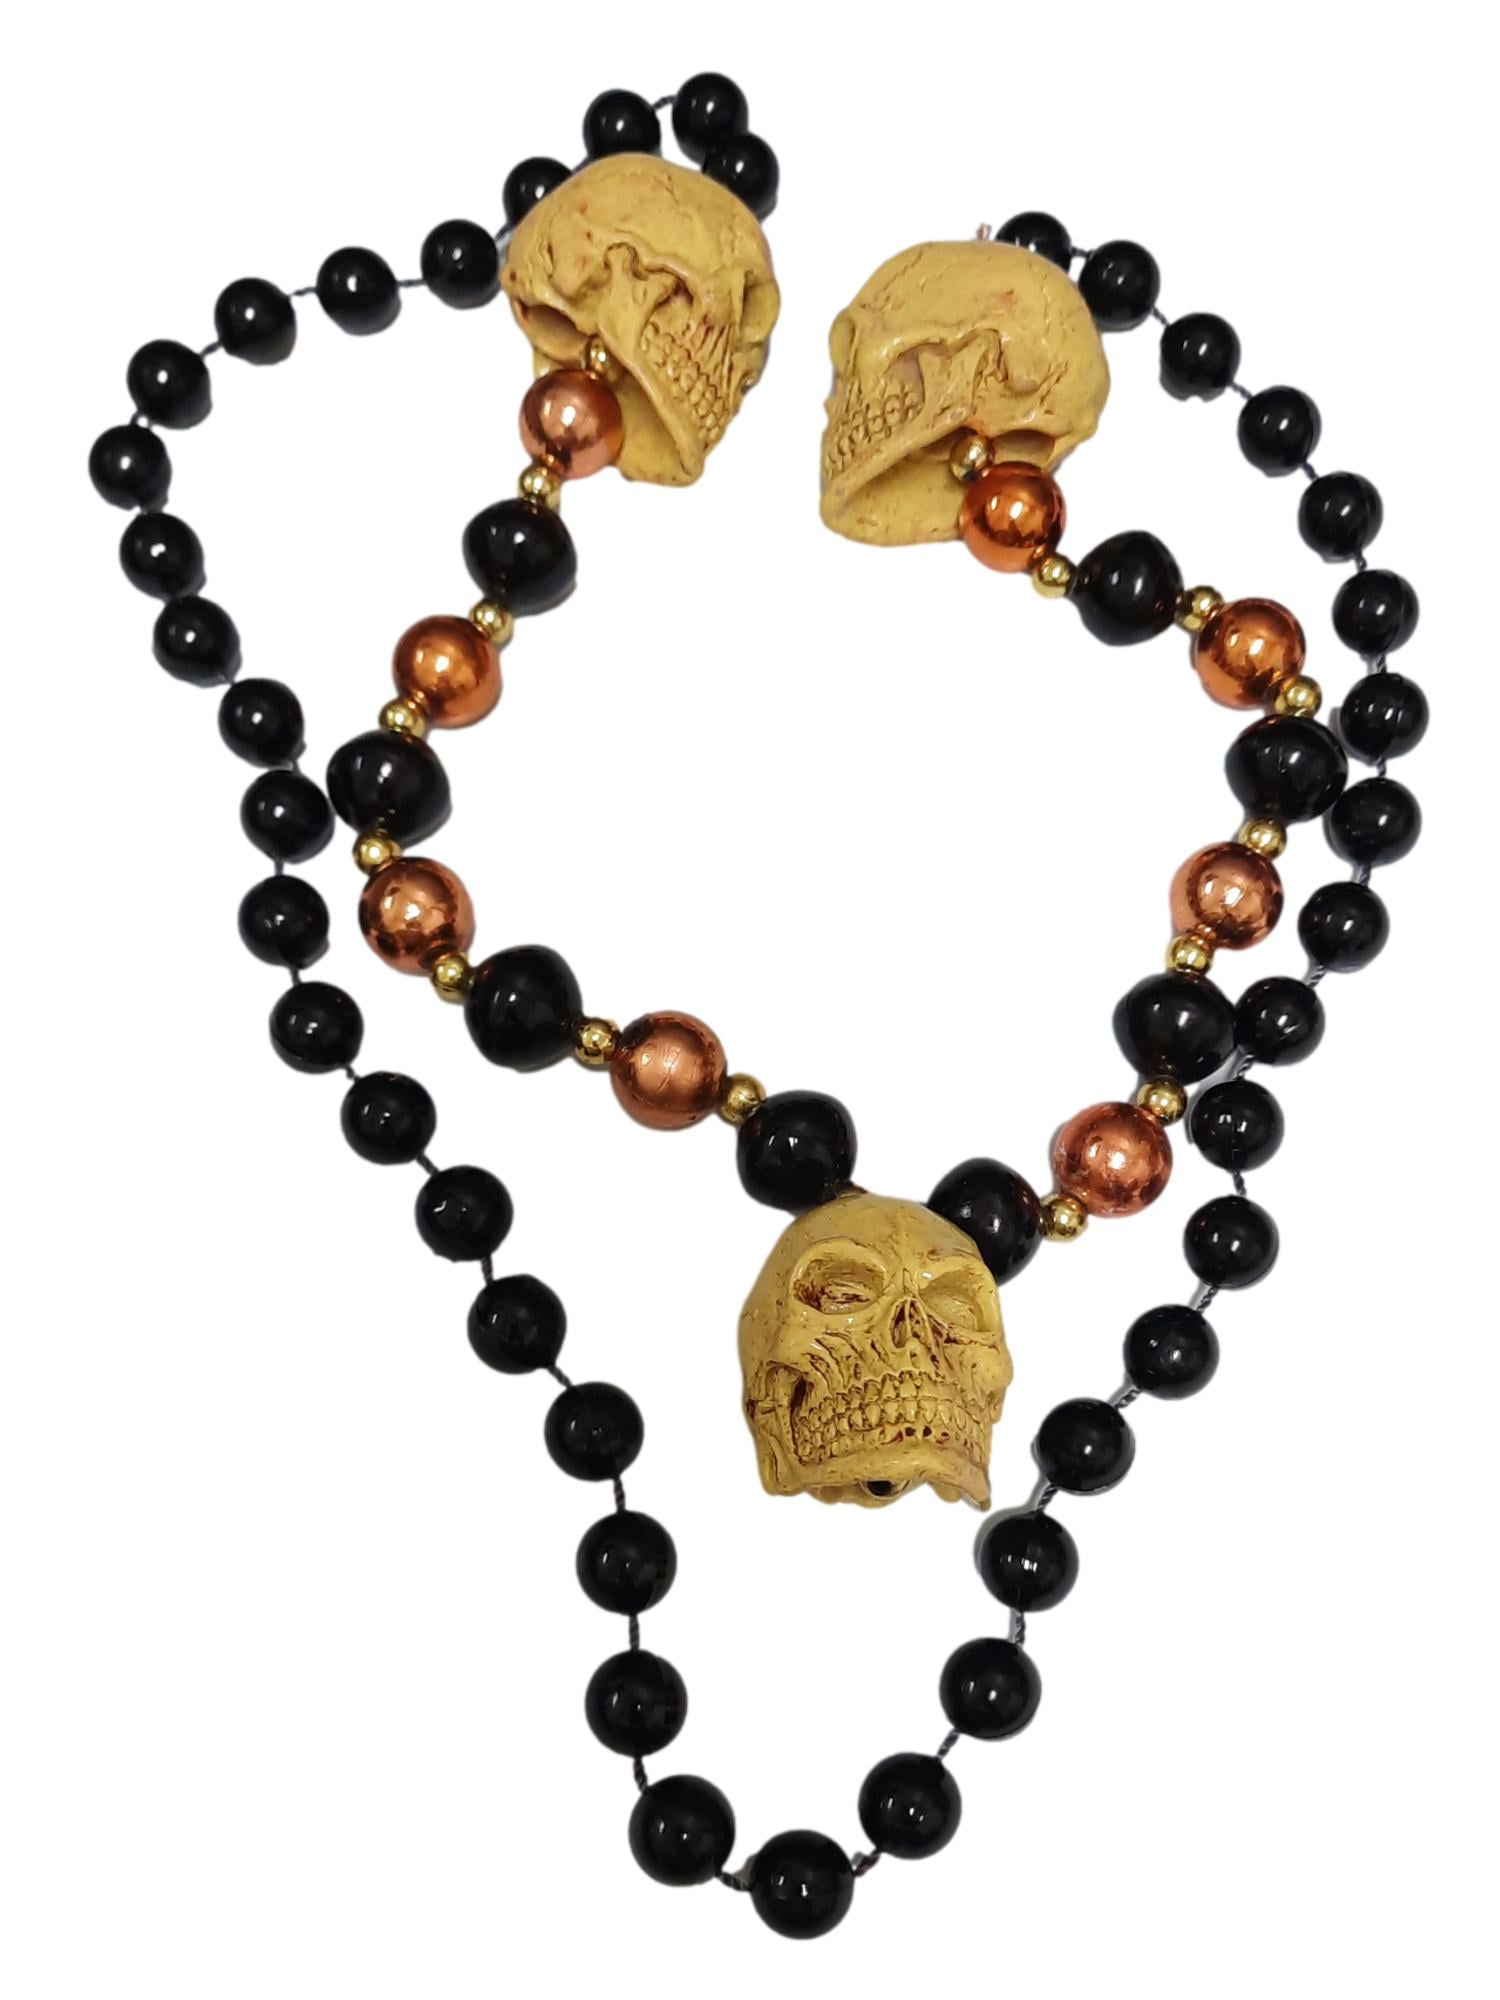  Robbstark Halloween Skulls Beads Necklaces Pirate Skull  Necklace Party Favors (12 Pcs) : Toys & Games